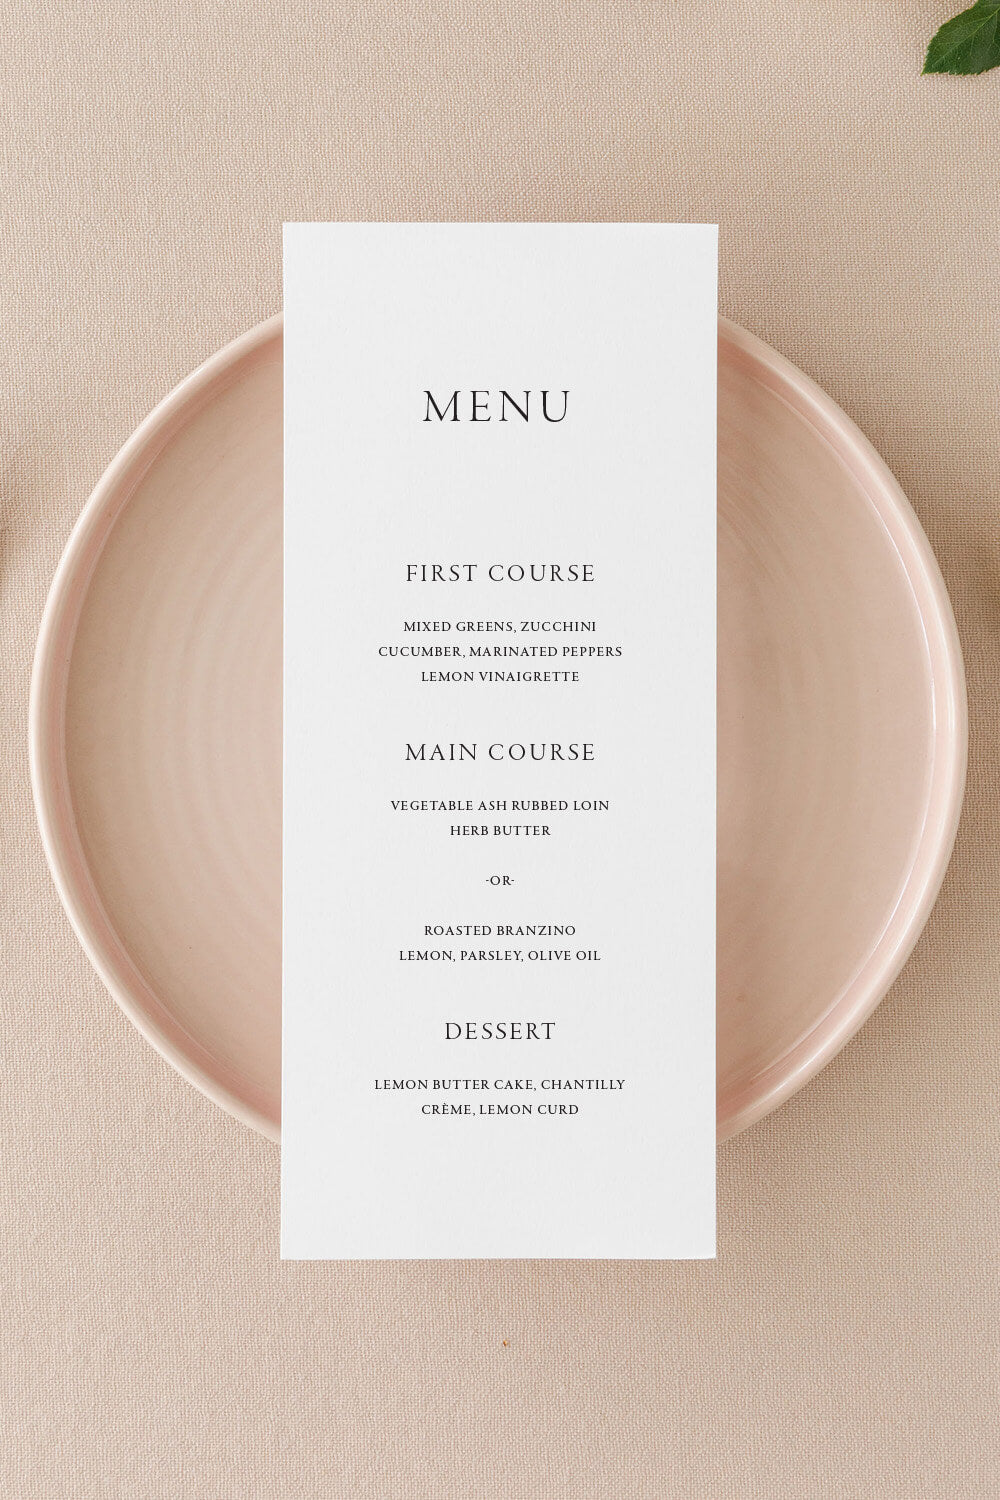 Simple Wedding Menu Cards Lily Roe Co.